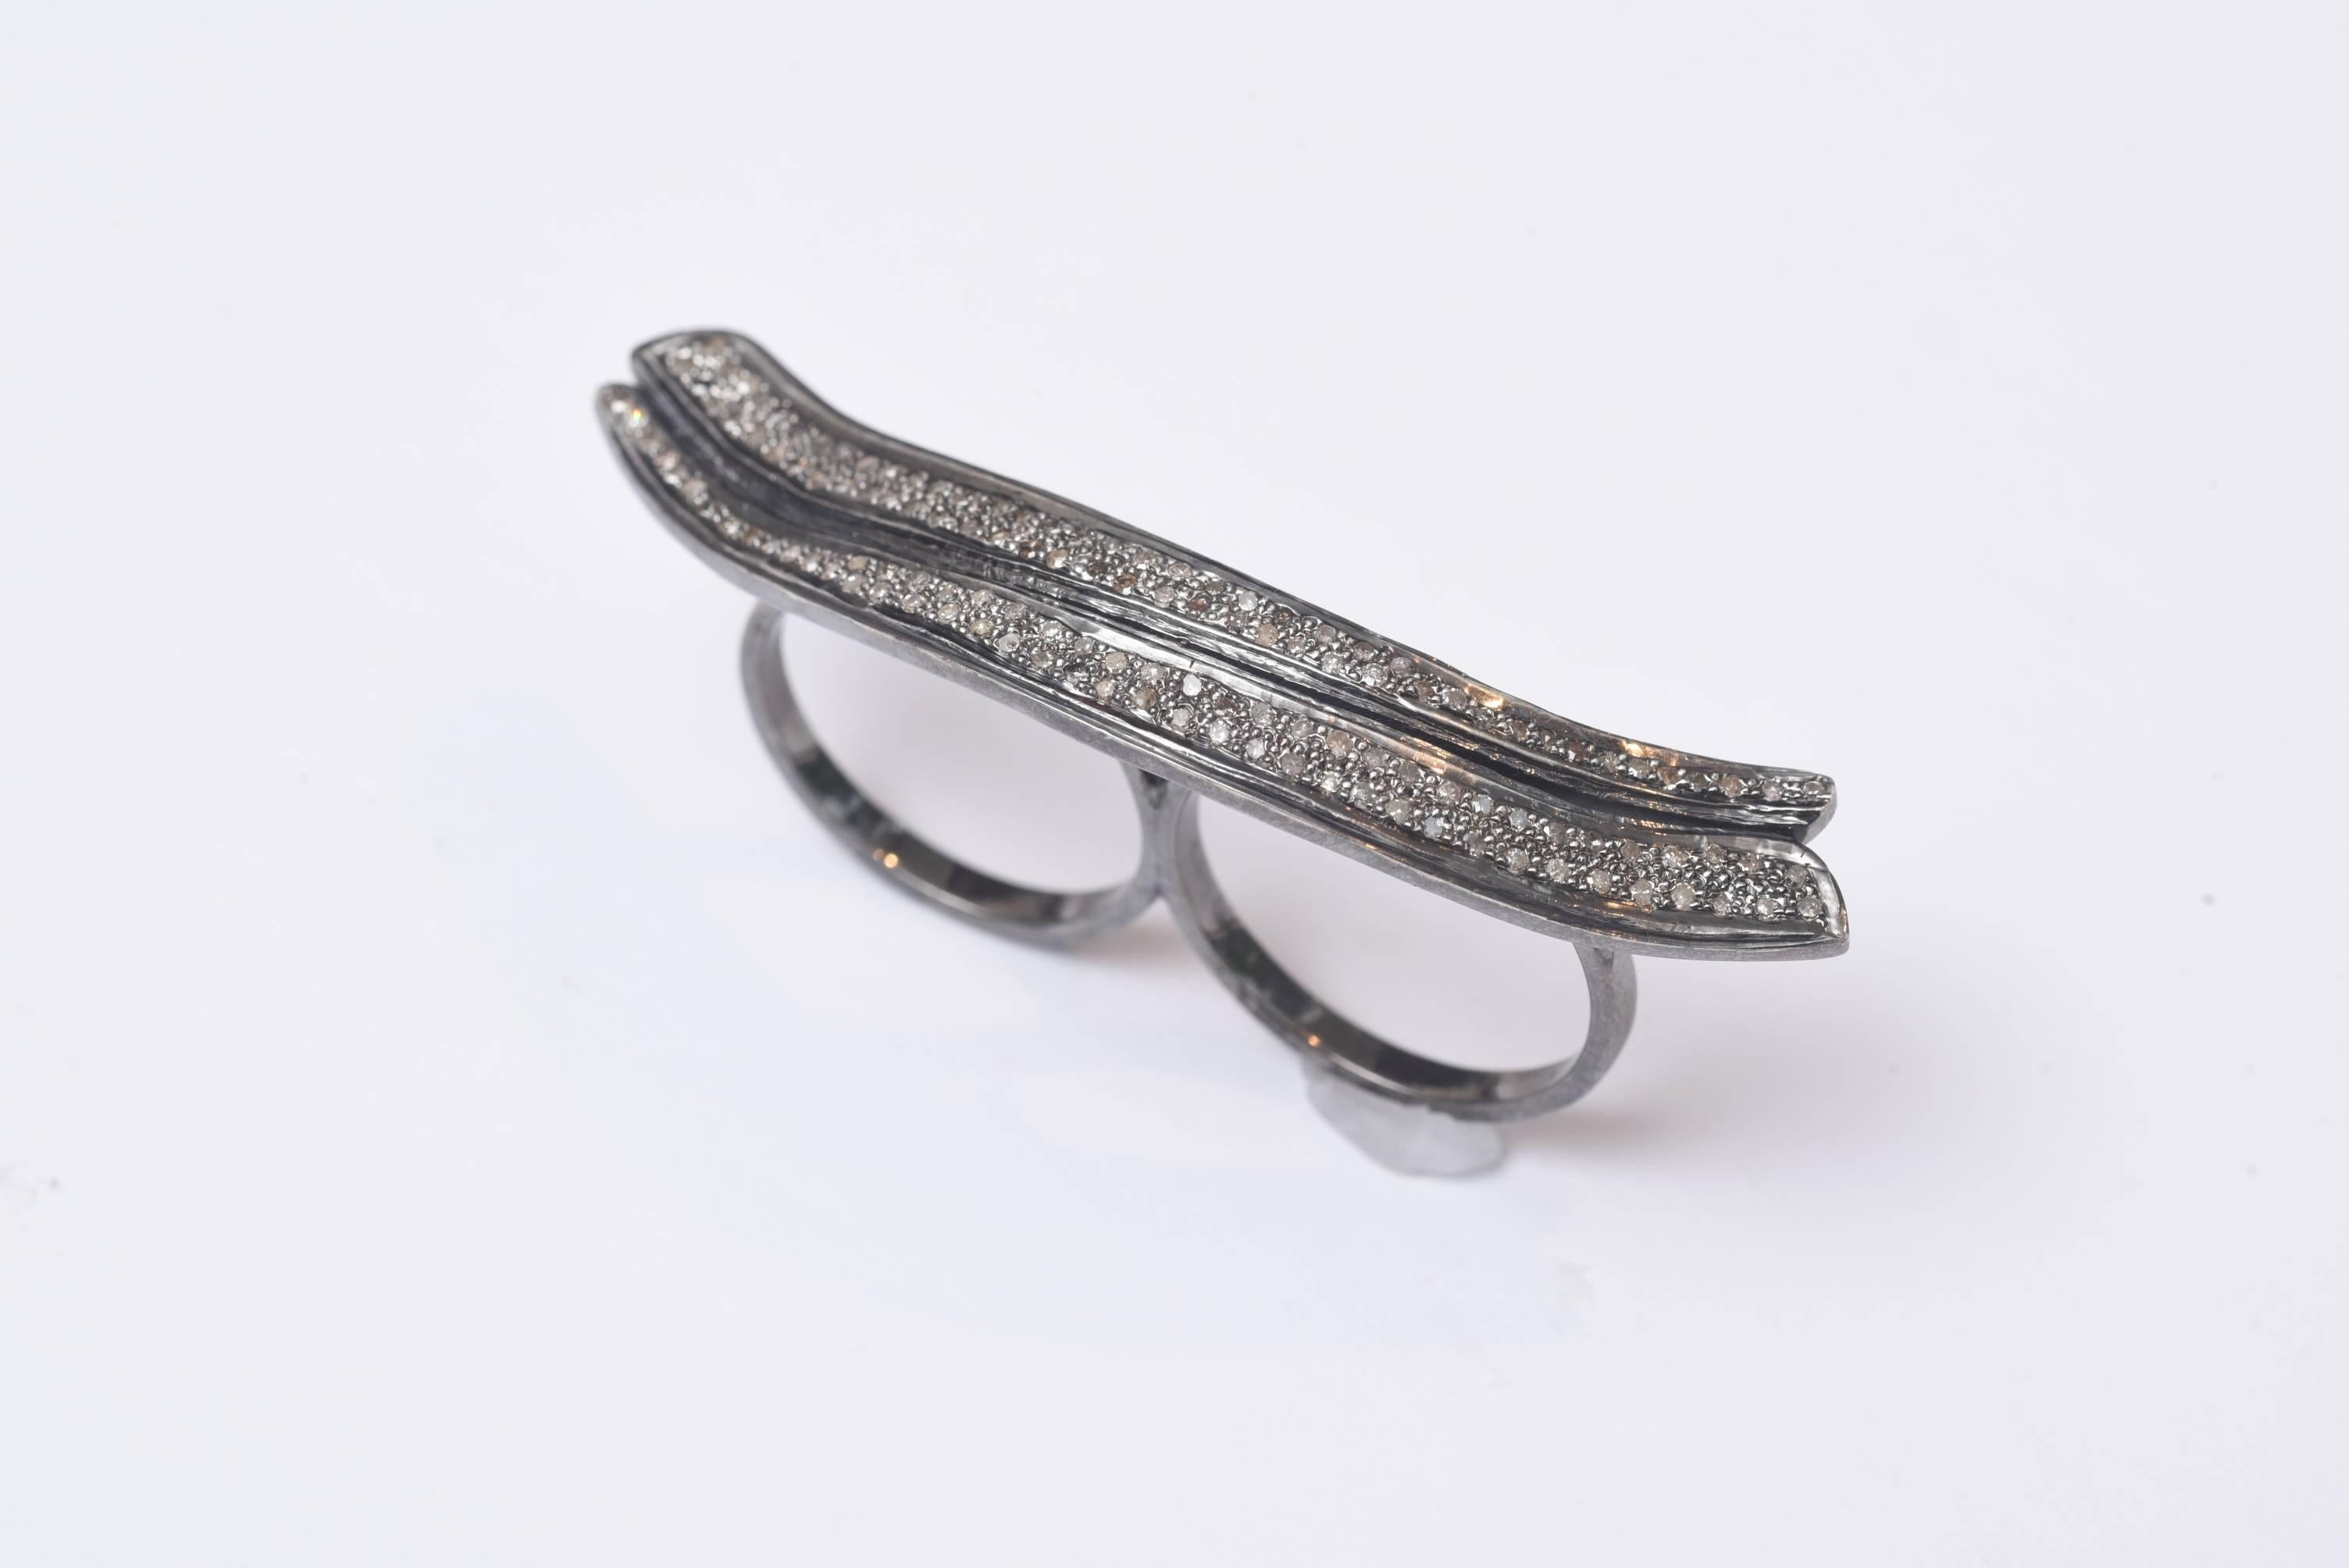 A double finger ring with a double wave of pave`-set diamonds.  In curls and undulates across the top of your hand.  A real conversation piece.  The carat weight of the diamonds is 1.71, set in an oxidized sterling silver.  The two ring sizes are